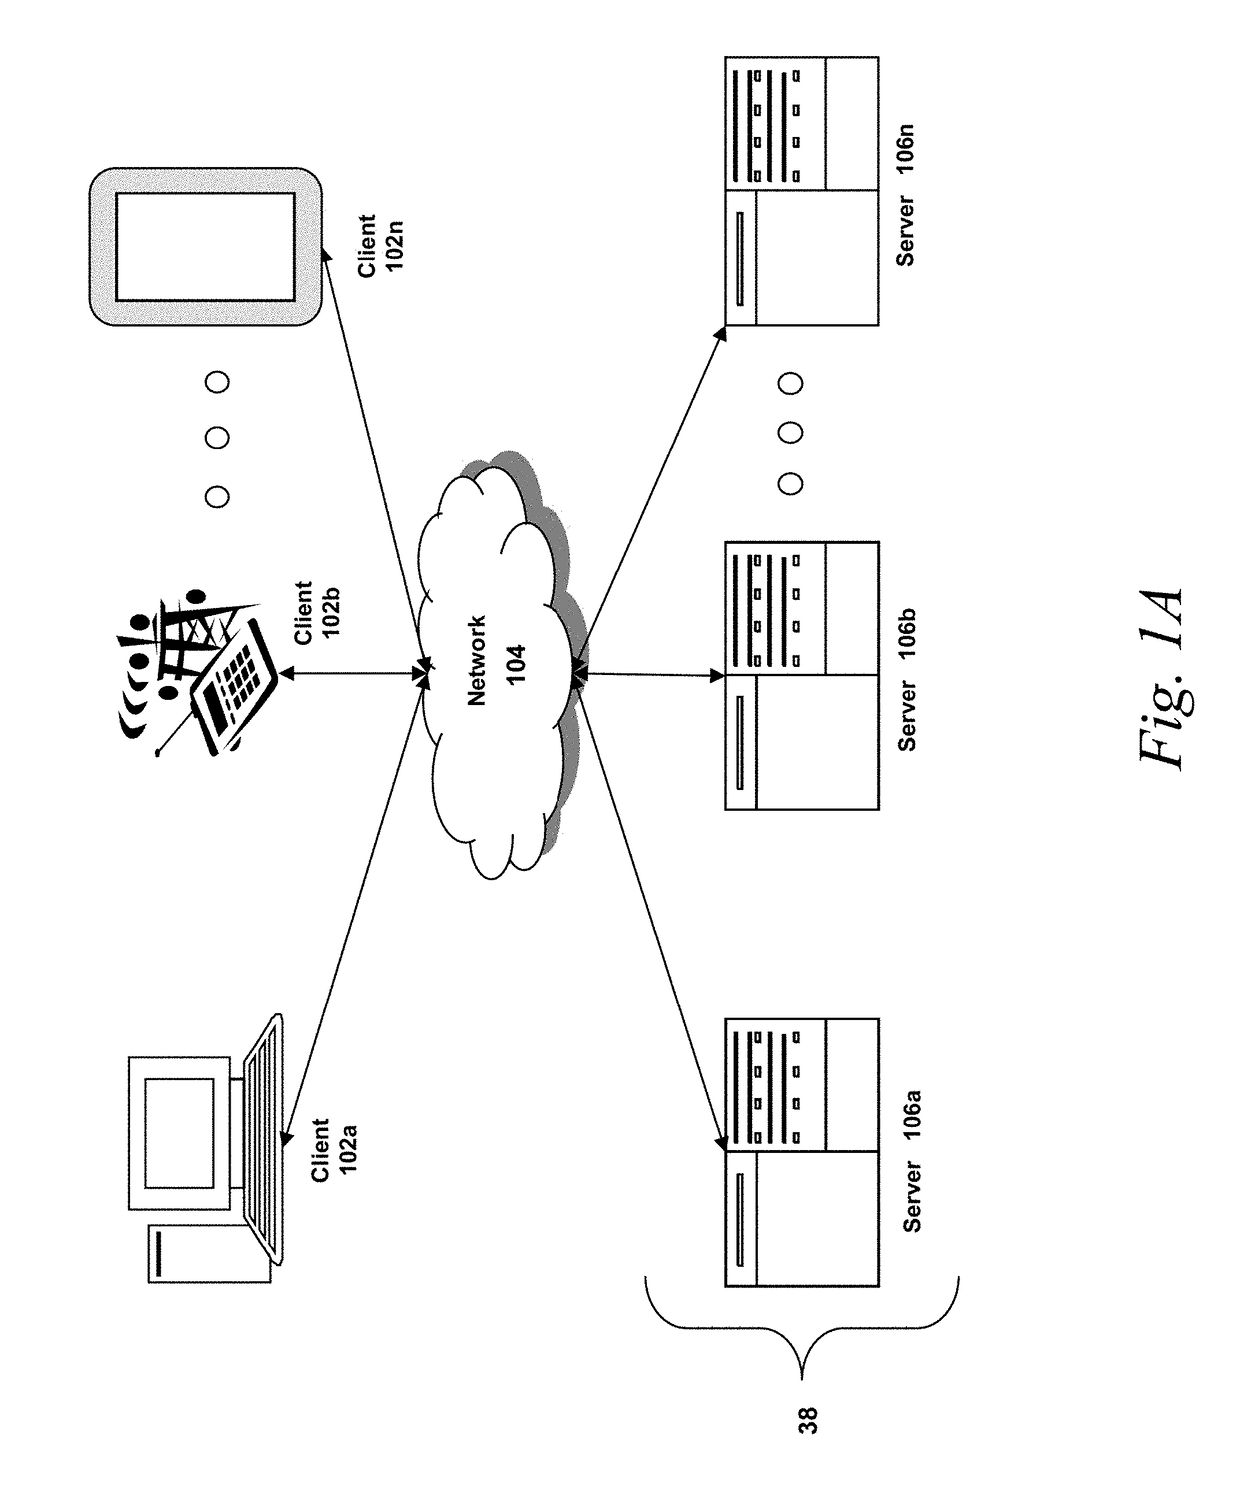 System and methods for defining object memory format in memory and store for object interactions, manipulation, and exchange in distributed network devices